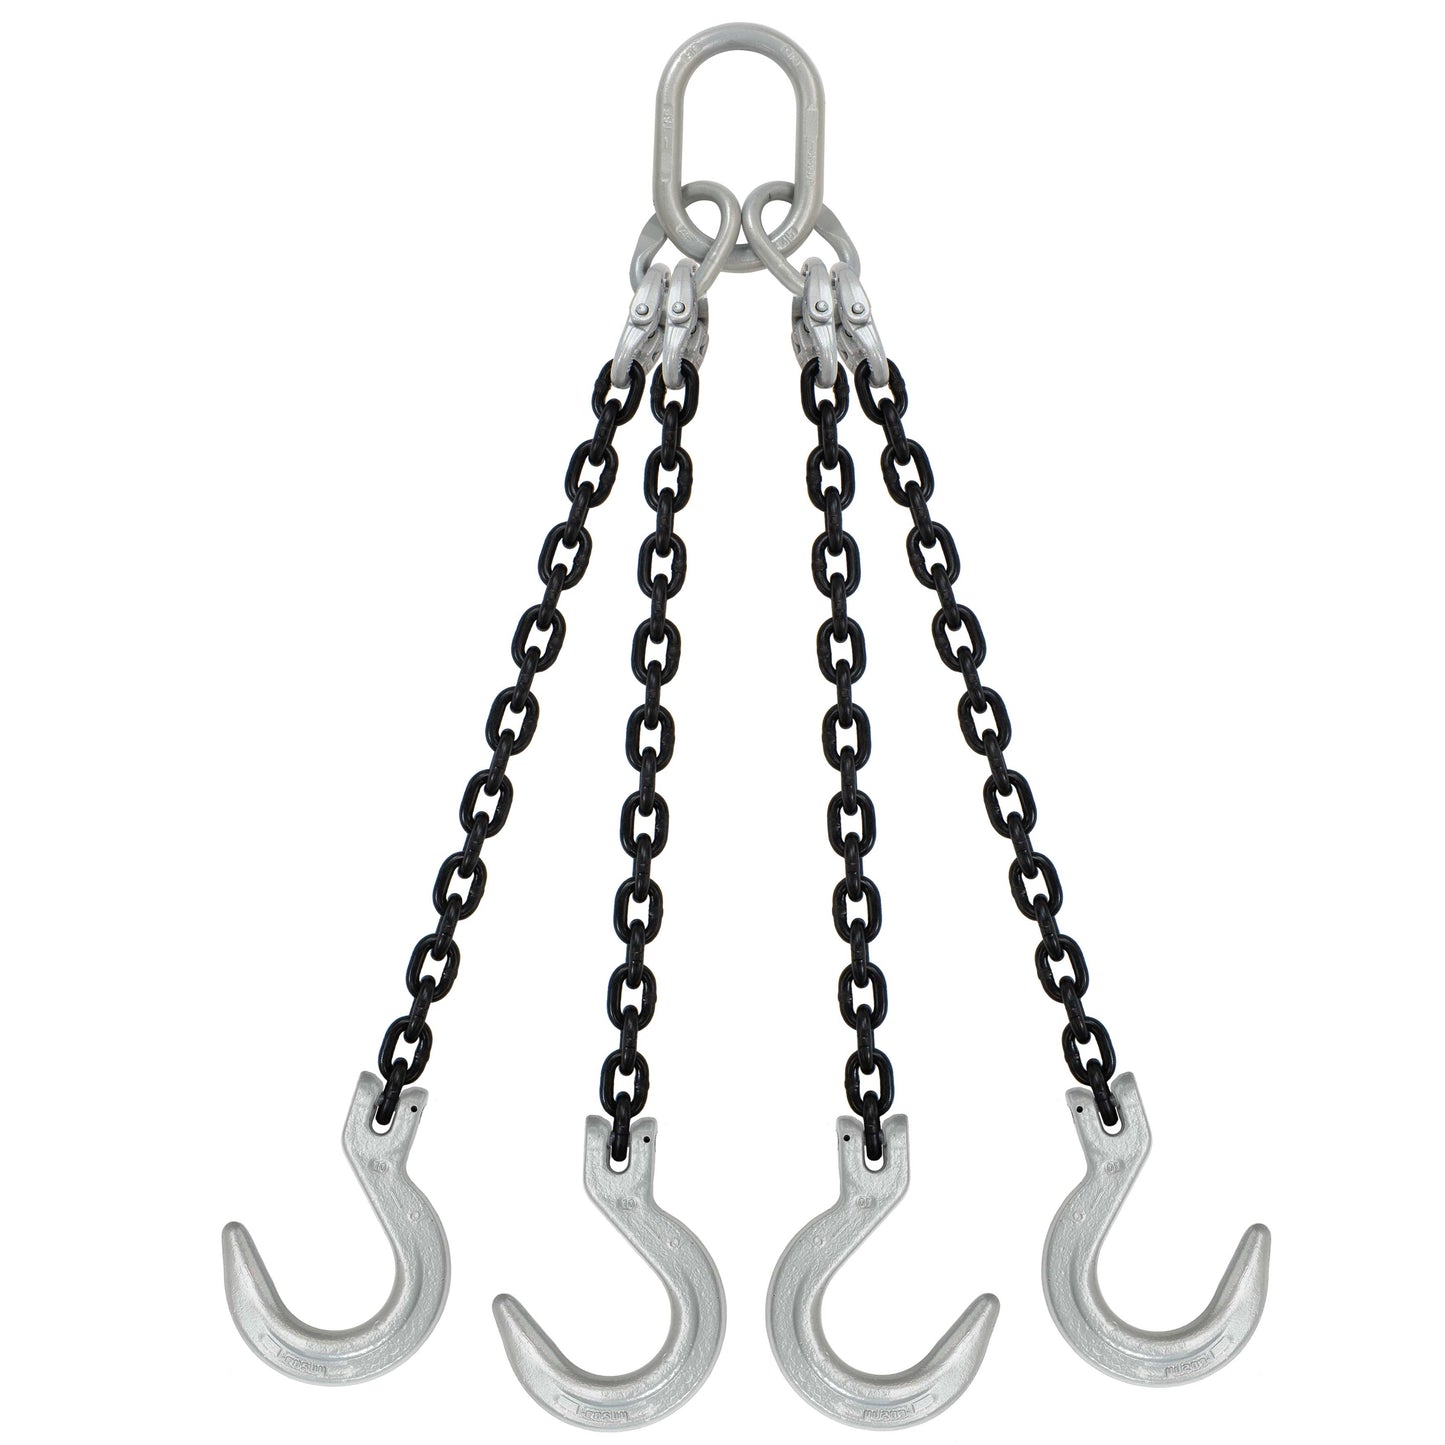 932 inch x 18 foot Domestic 4 Leg Chain Sling w Crosby Foundry Hooks Grade 100 image 1 of 2